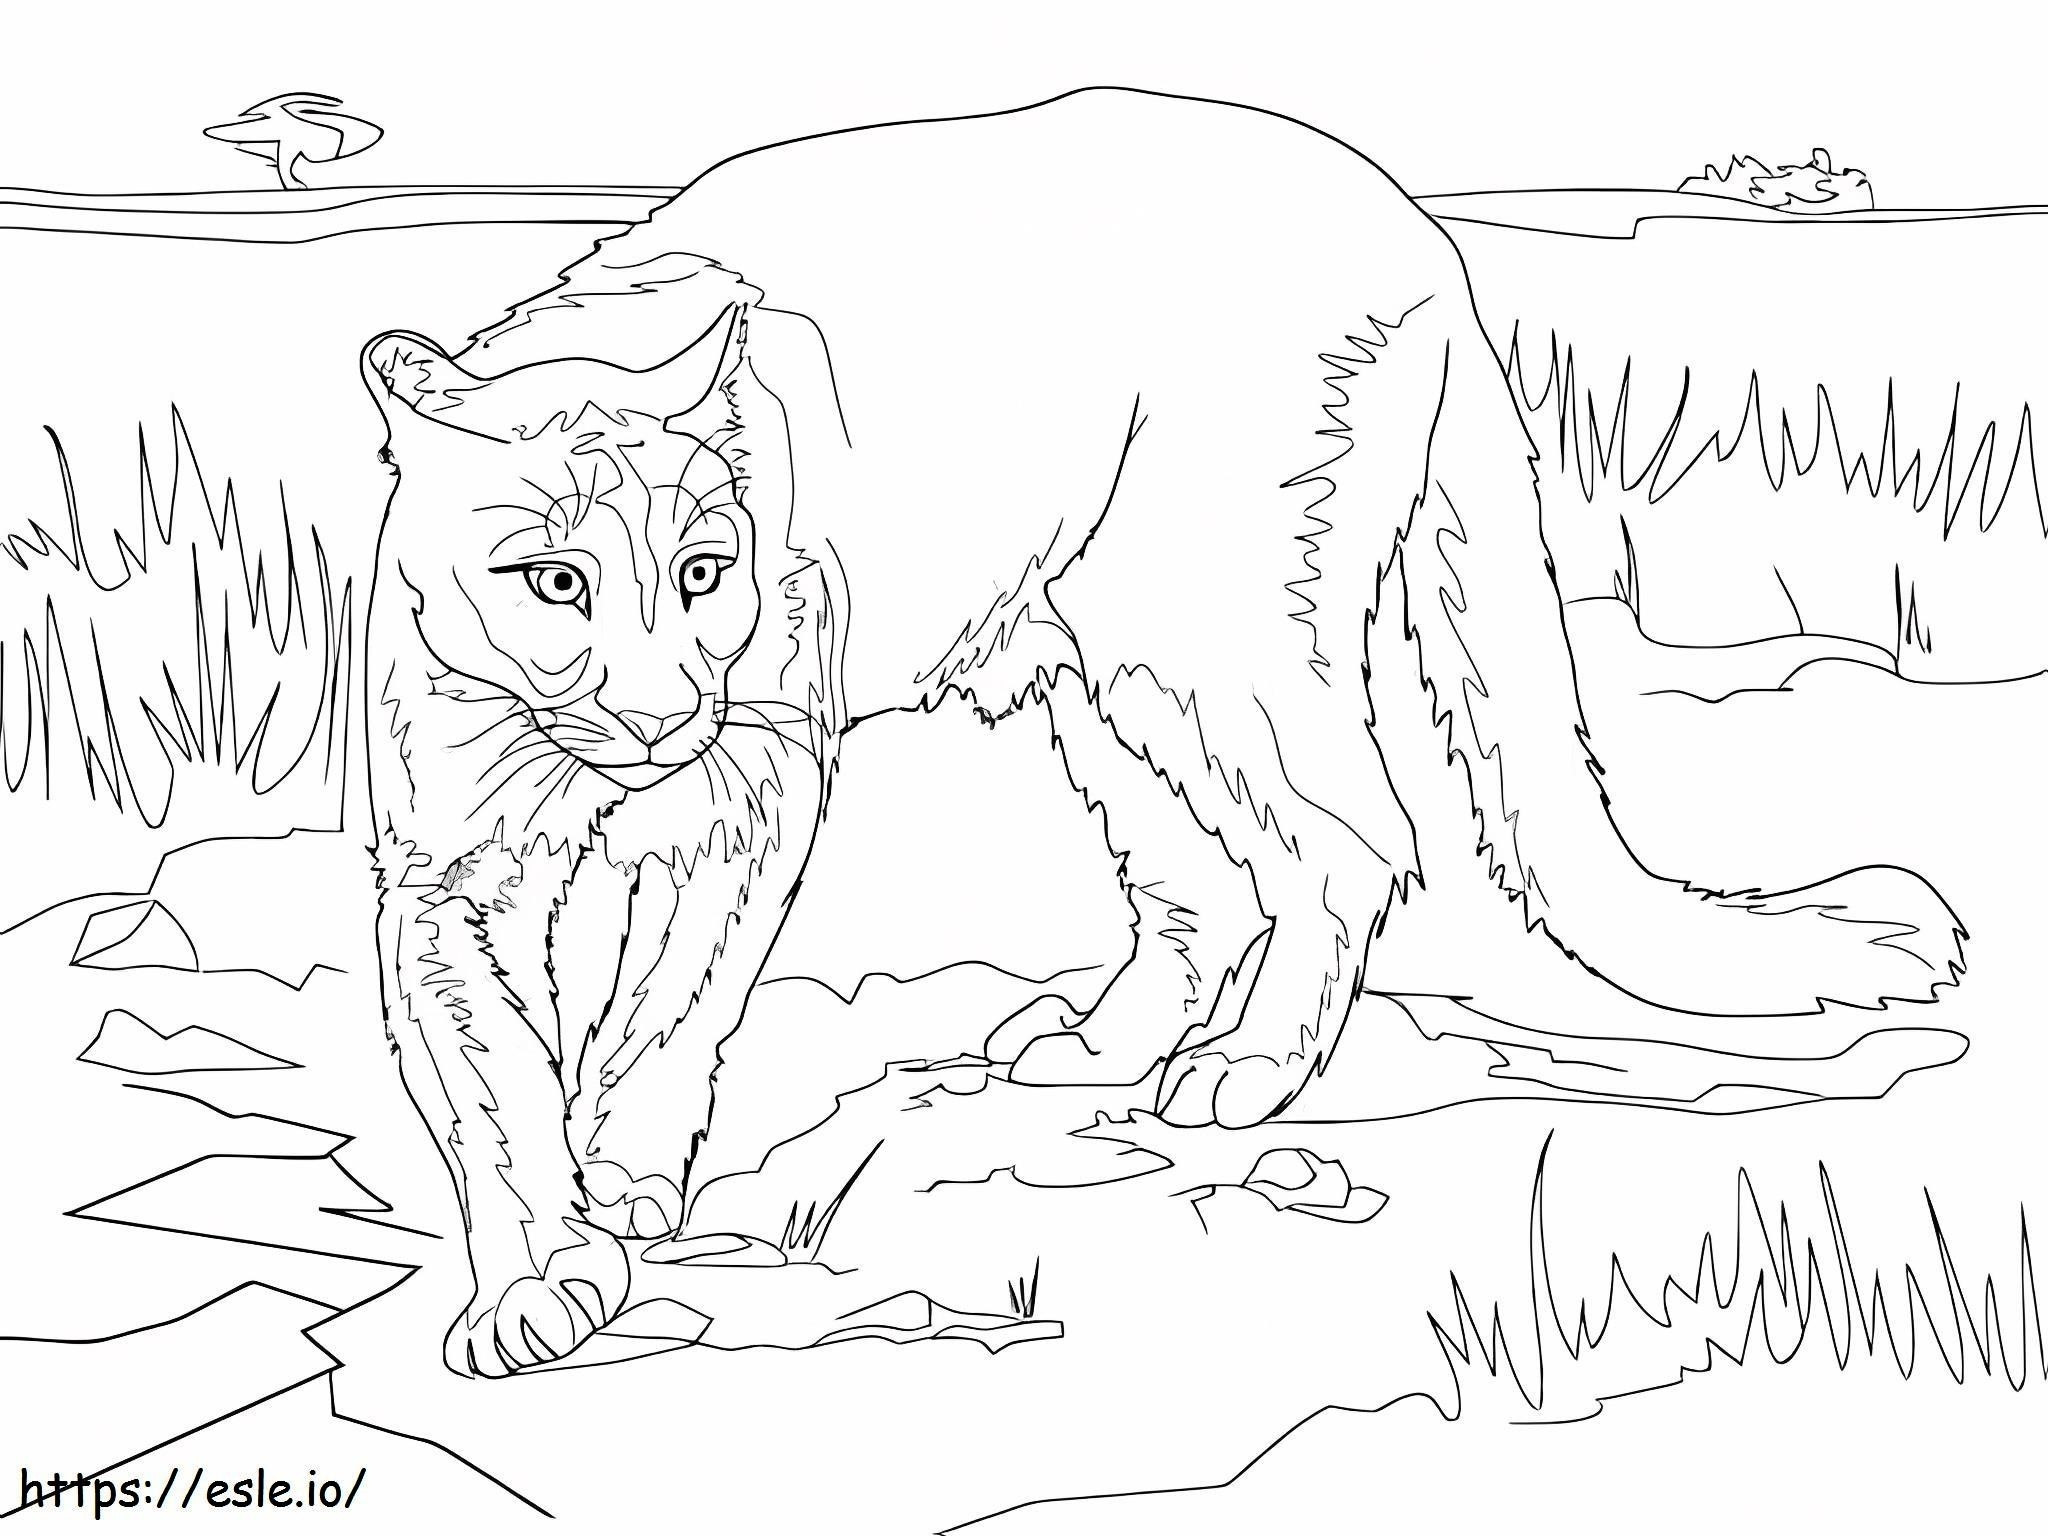 Awesome Puma coloring page